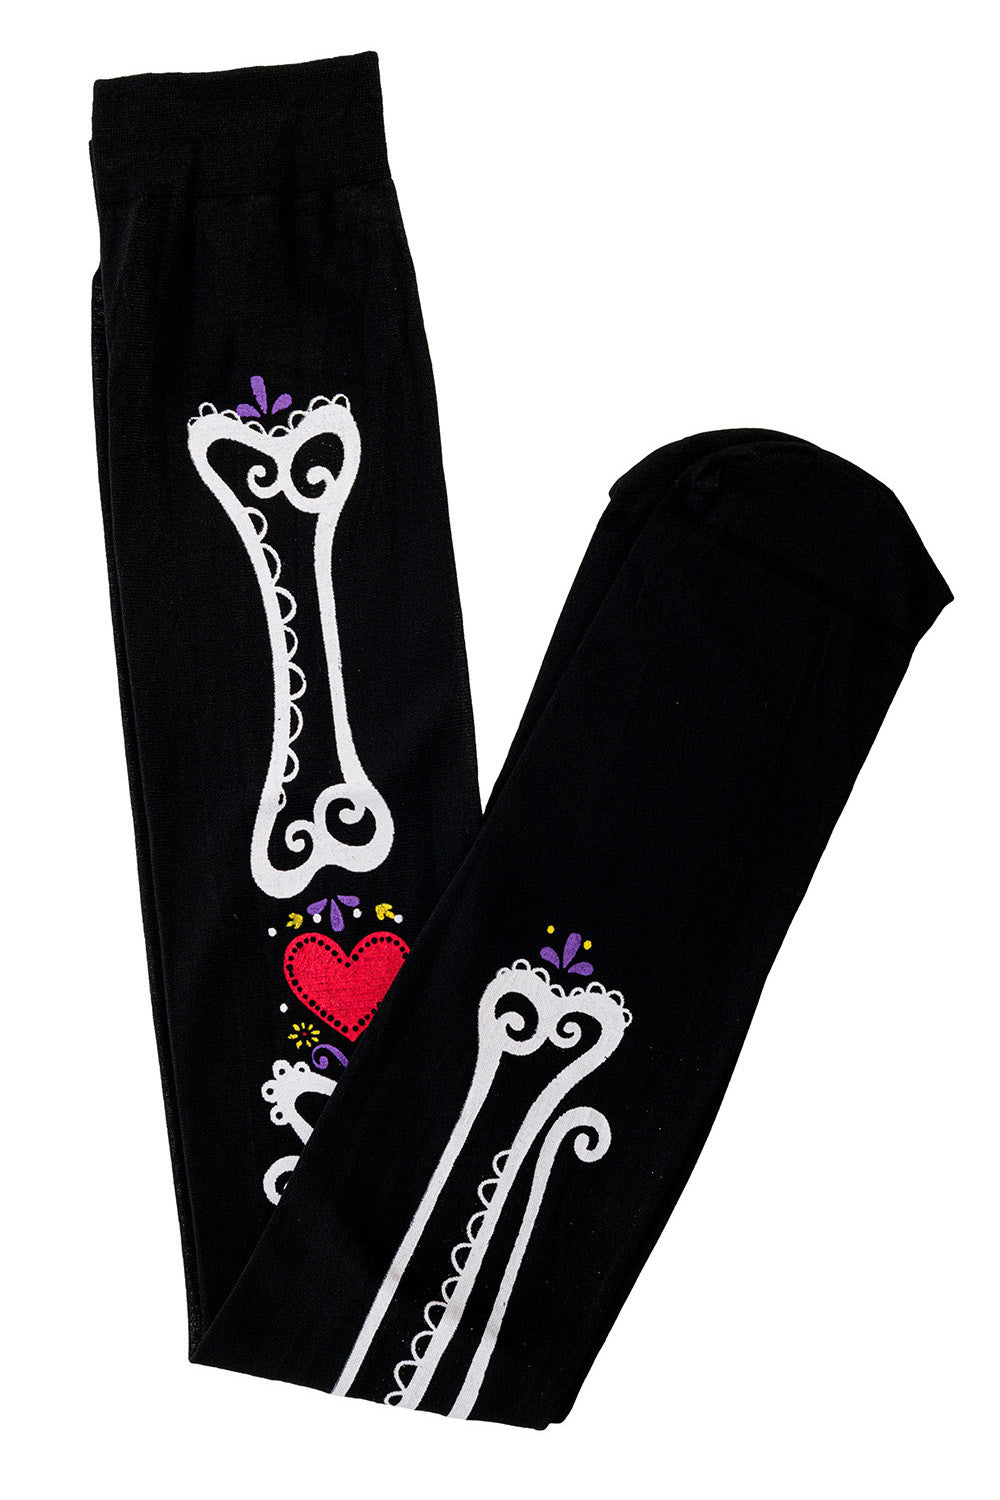 Black over the knee socks with bone and heart print 